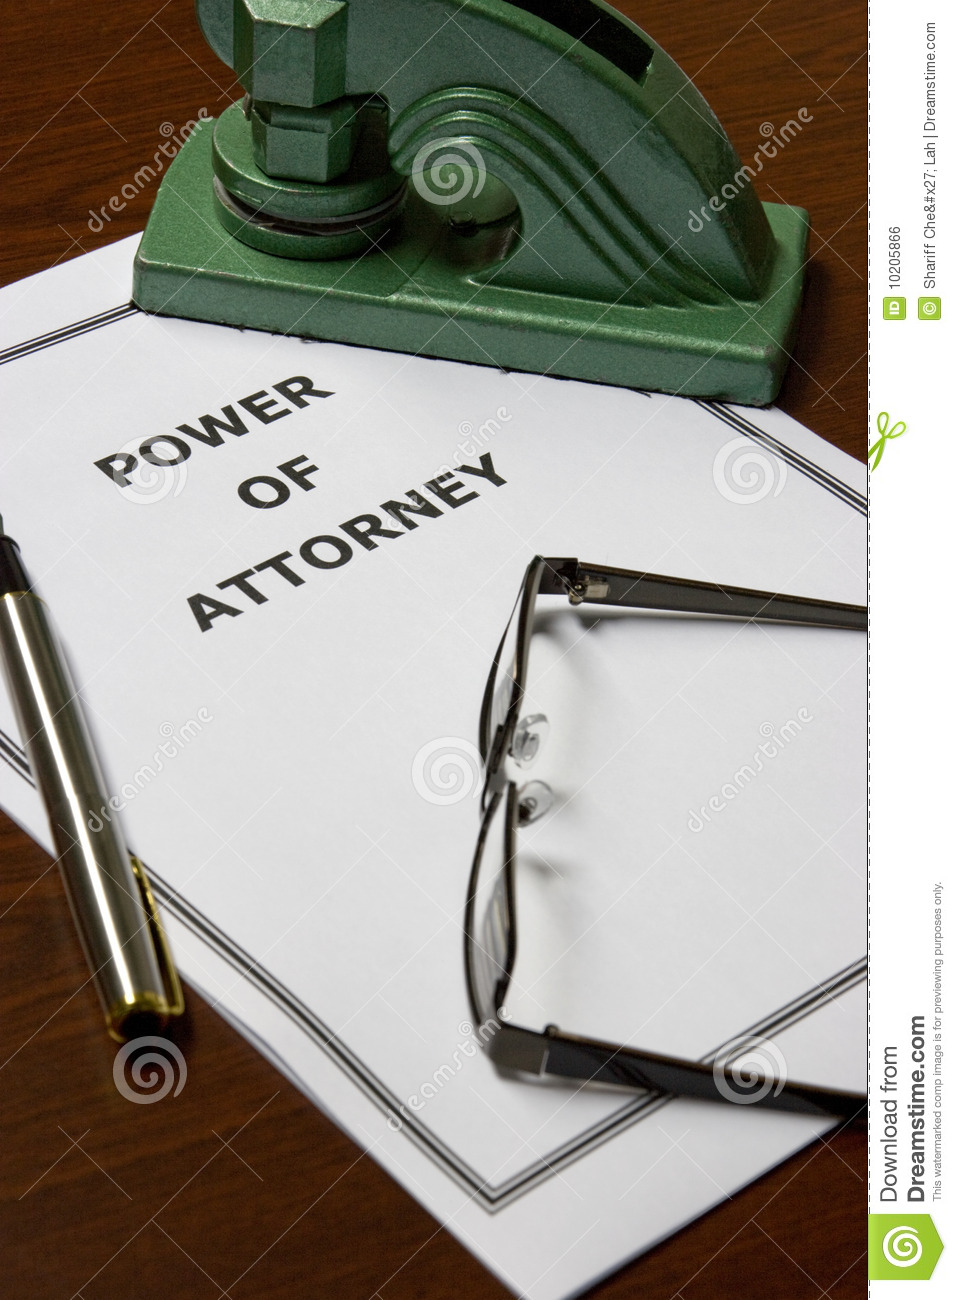 Power Of Attorney Royalty Free Stock Image   Image  10205866